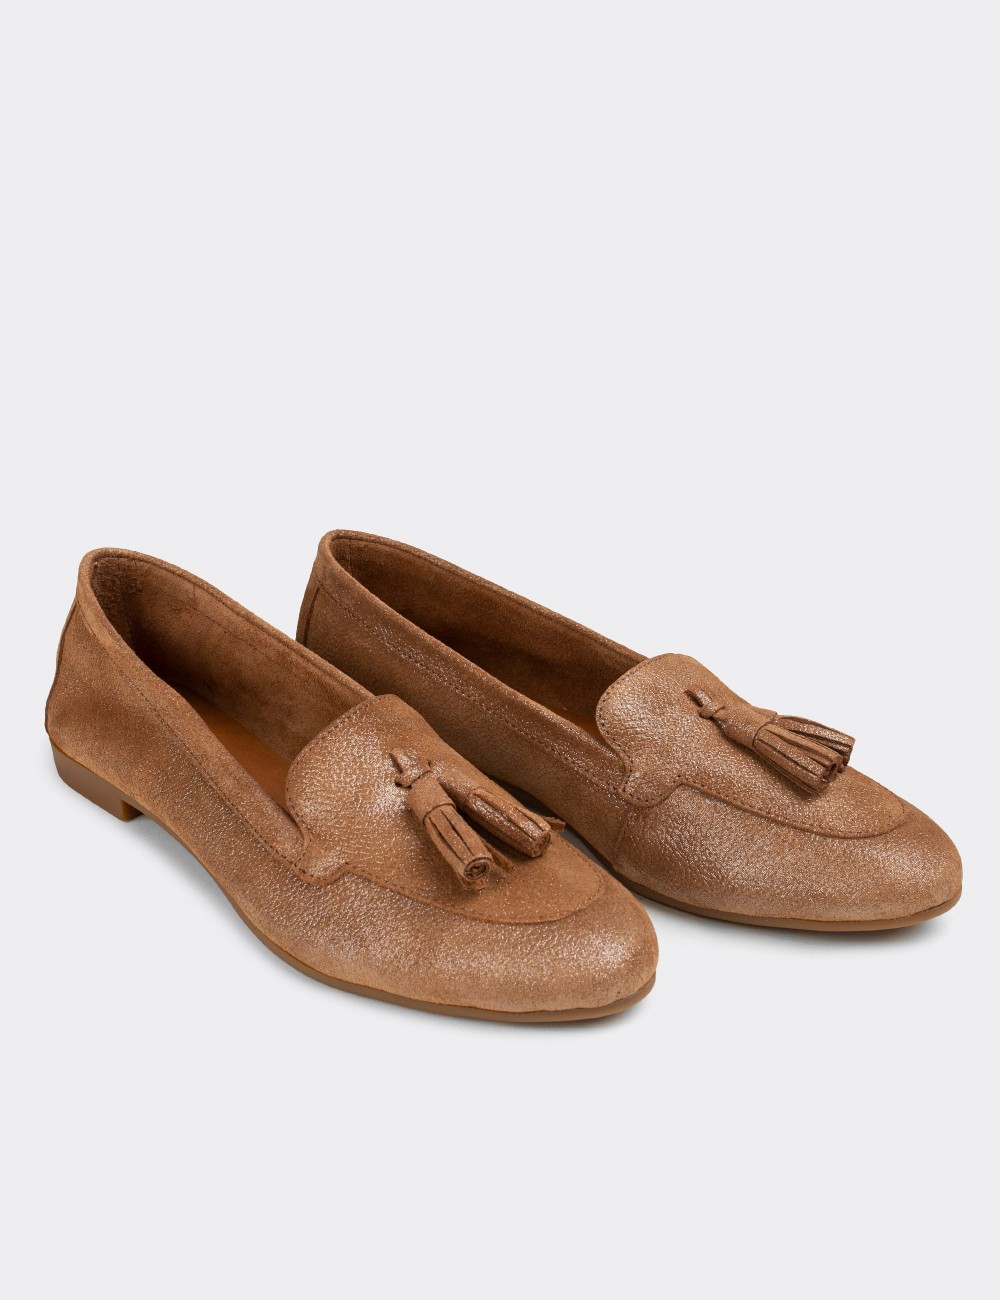 Copper Suede Leather Loafers - E3209ZBKRC01